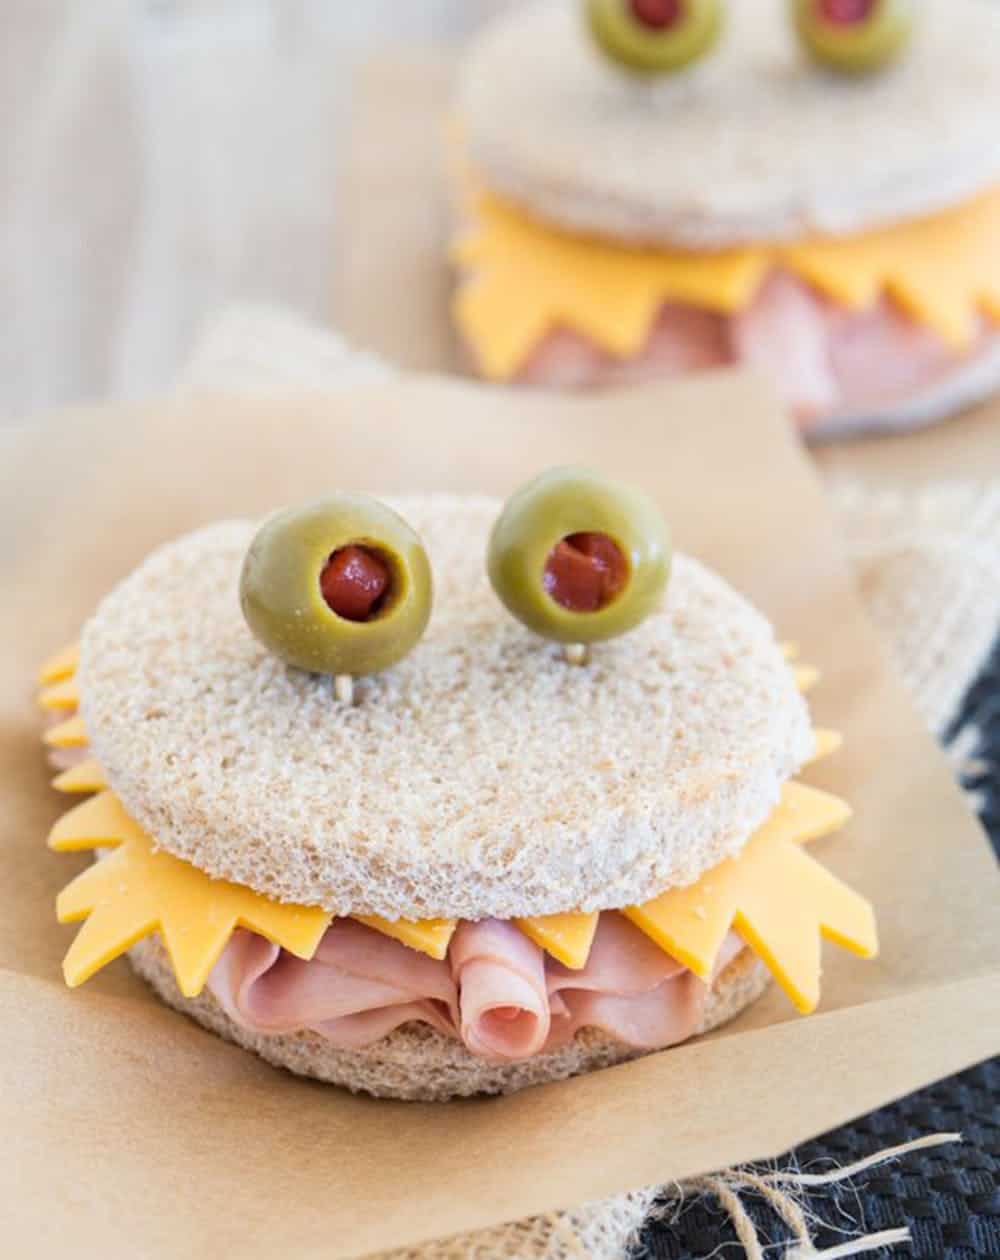 Monster sandwiches for school lunches